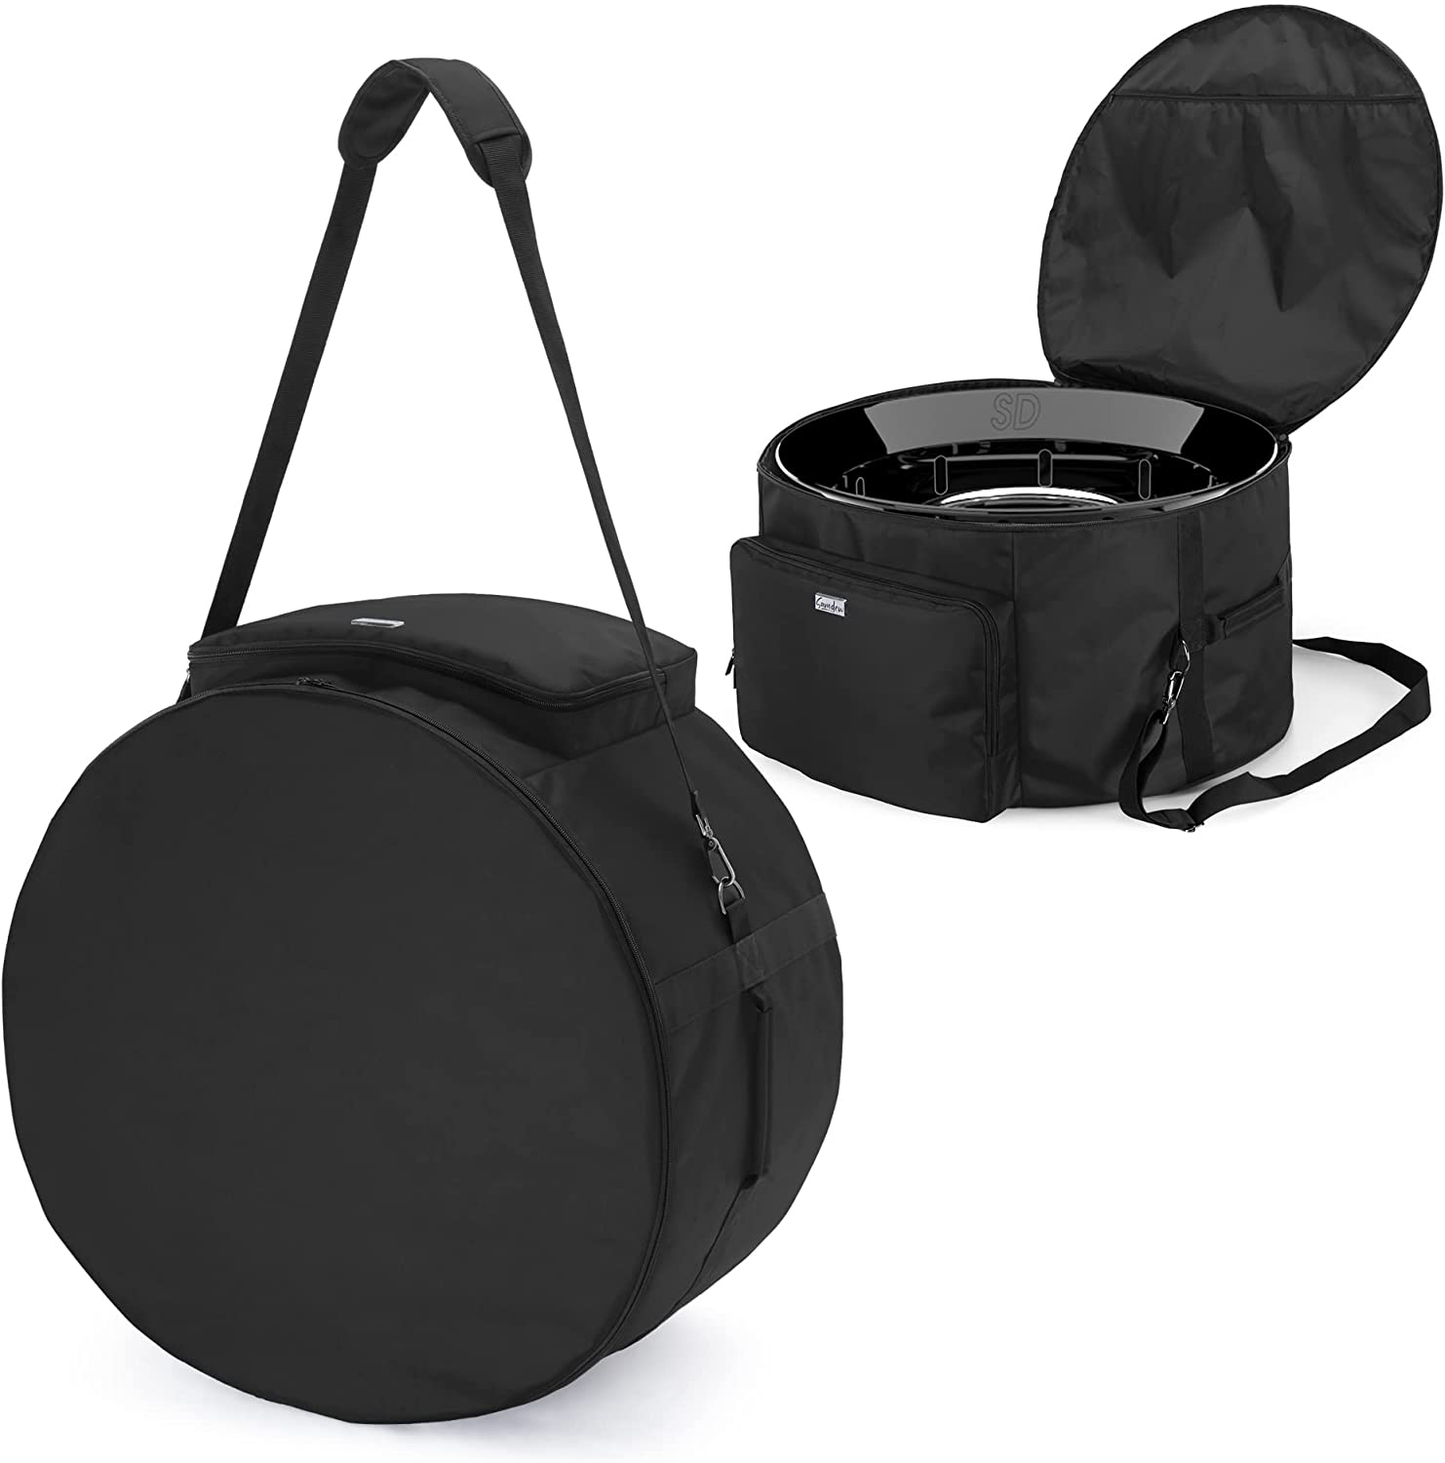 SAMDEW 24-Inch Outdoor Fire Pit Bag Compatible with Outland Firebowl Model 883 885, Firebowl Travel Carrying Case for 24-Inch Diameter Propane Gas Fire Pit, Black, Bag Only